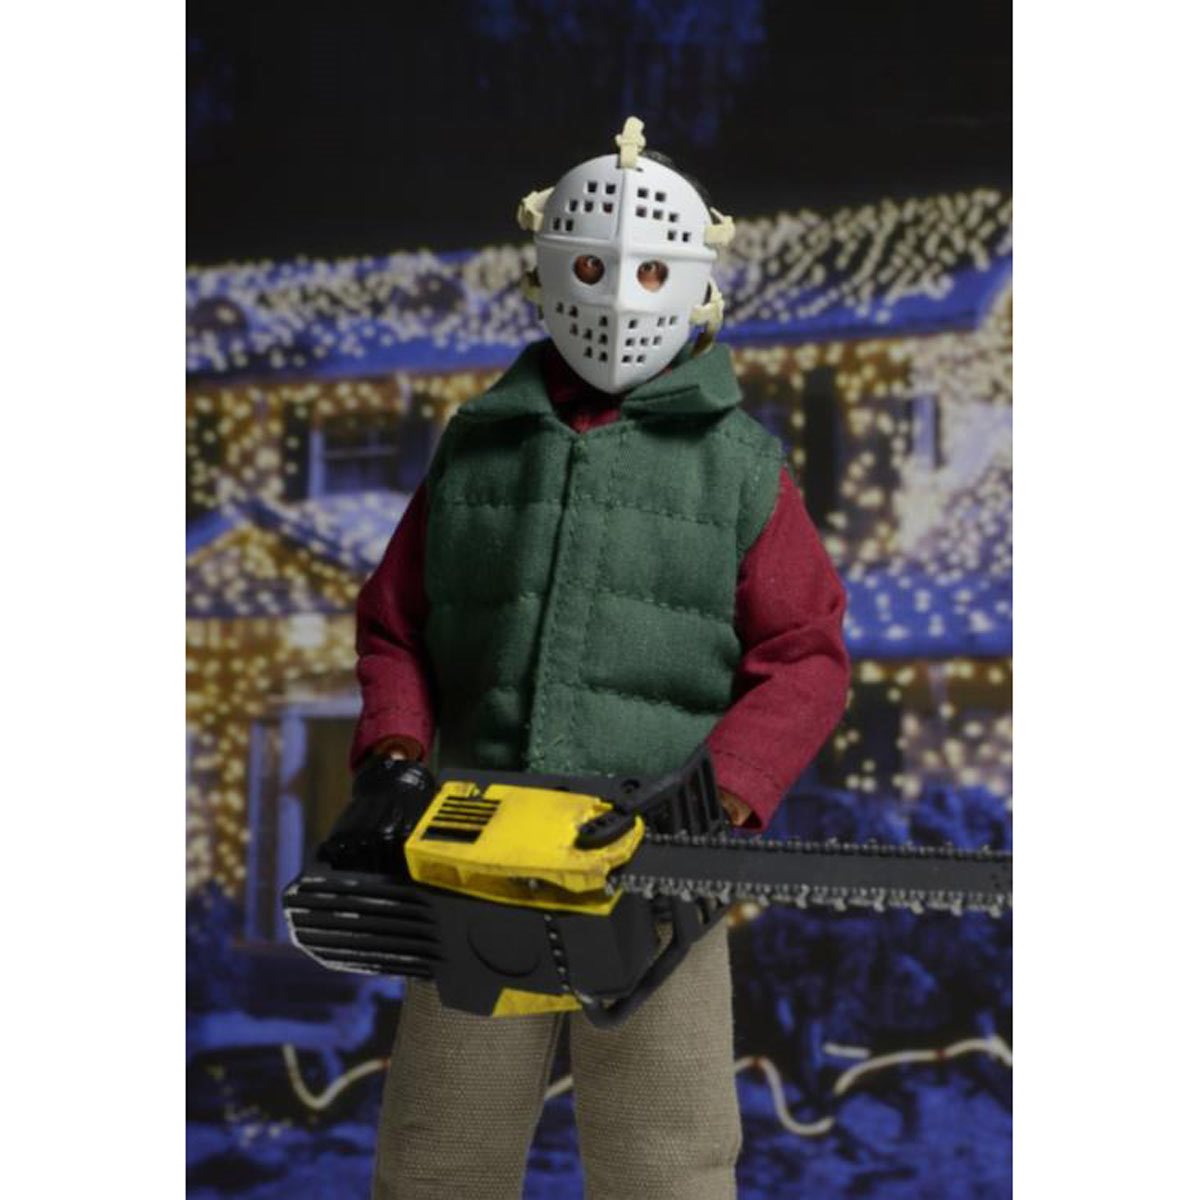 NECA - Christmas Vacation - Chainsaw Clark 8" Clothed Action Figure - Zlc Collectibles